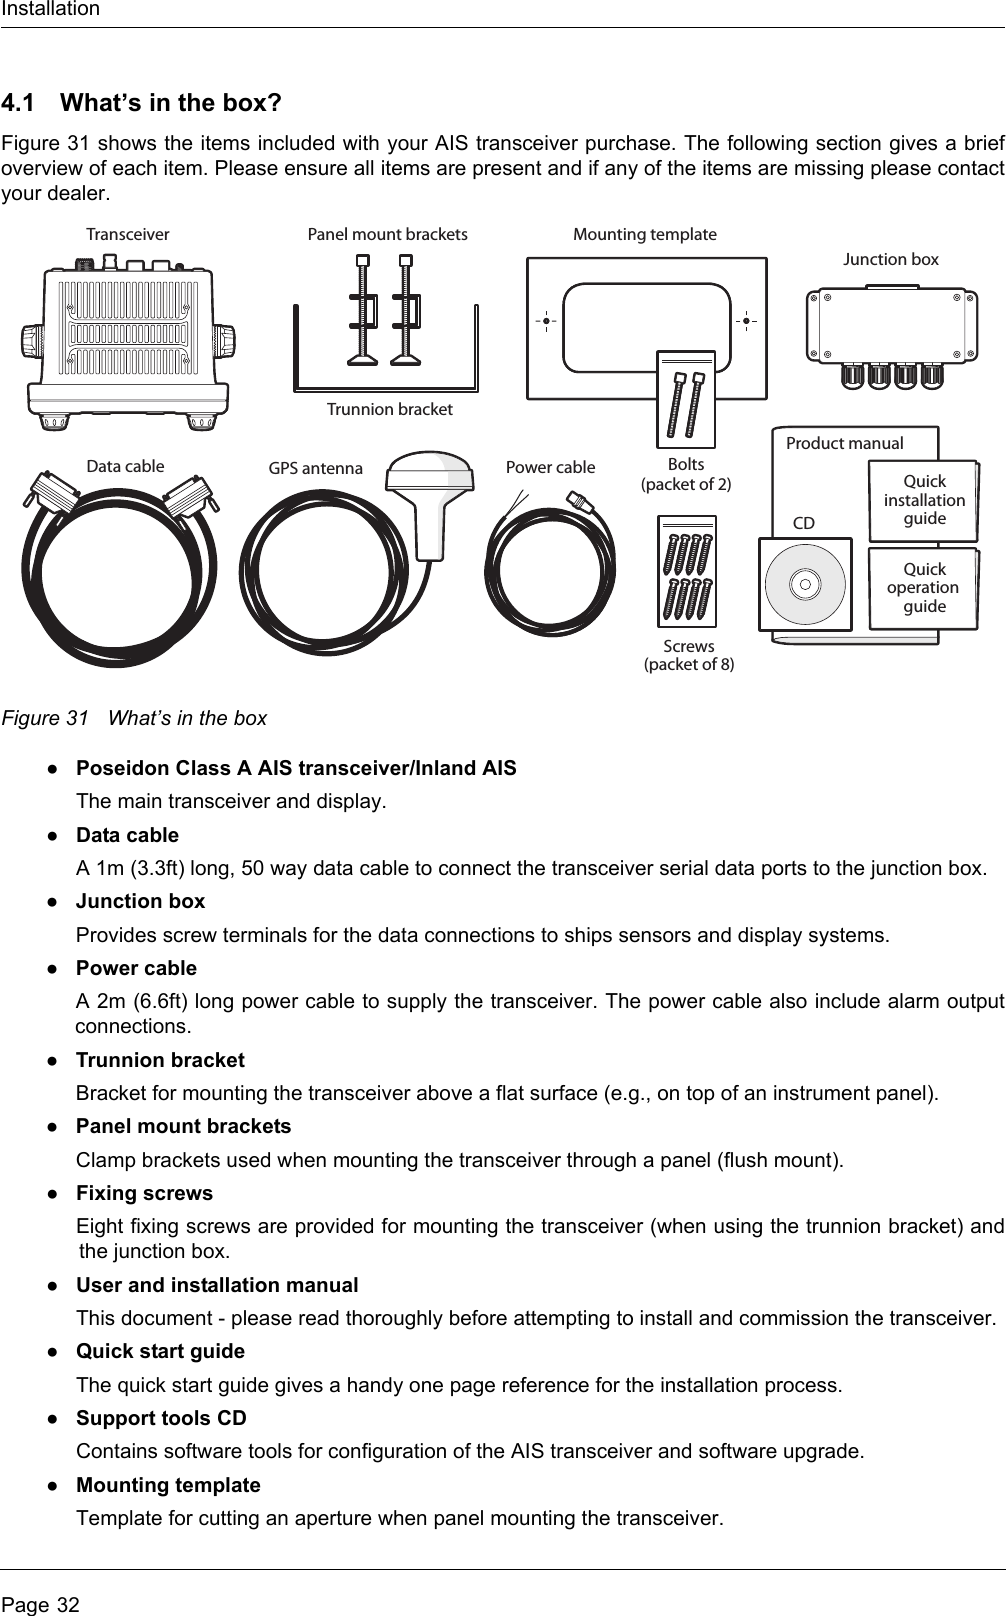 InstallationPage 324.1 What’s in the box?Figure 31 shows the items included with your AIS transceiver purchase. The following section gives a briefoverview of each item. Please ensure all items are present and if any of the items are missing please contactyour dealer.Figure 31 What’s in the box●Poseidon Class A AIS transceiver/Inland AISThe main transceiver and display.●Data cableA 1m (3.3ft) long, 50 way data cable to connect the transceiver serial data ports to the junction box.●Junction boxProvides screw terminals for the data connections to ships sensors and display systems.●Power cableA 2m (6.6ft) long power cable to supply the transceiver. The power cable also include alarm outputconnections.●Trunnion bracketBracket for mounting the transceiver above a flat surface (e.g., on top of an instrument panel).●Panel mount bracketsClamp brackets used when mounting the transceiver through a panel (flush mount).●Fixing screwsEight fixing screws are provided for mounting the transceiver (when using the trunnion bracket) andthe junction box. ●User and installation manualThis document - please read thoroughly before attempting to install and commission the transceiver.●Quick start guideThe quick start guide gives a handy one page reference for the installation process.●Support tools CDContains software tools for configuration of the AIS transceiver and software upgrade.●Mounting templateTemplate for cutting an aperture when panel mounting the transceiver. Product manualMounting templateData cable Power cableCDTransceiverTrunnion bracketPanel mount bracketsJunction boxQuickinstallationguideScrews(packet of 8)Bolts(packet of 2)GPS antennaQuickoperation guide